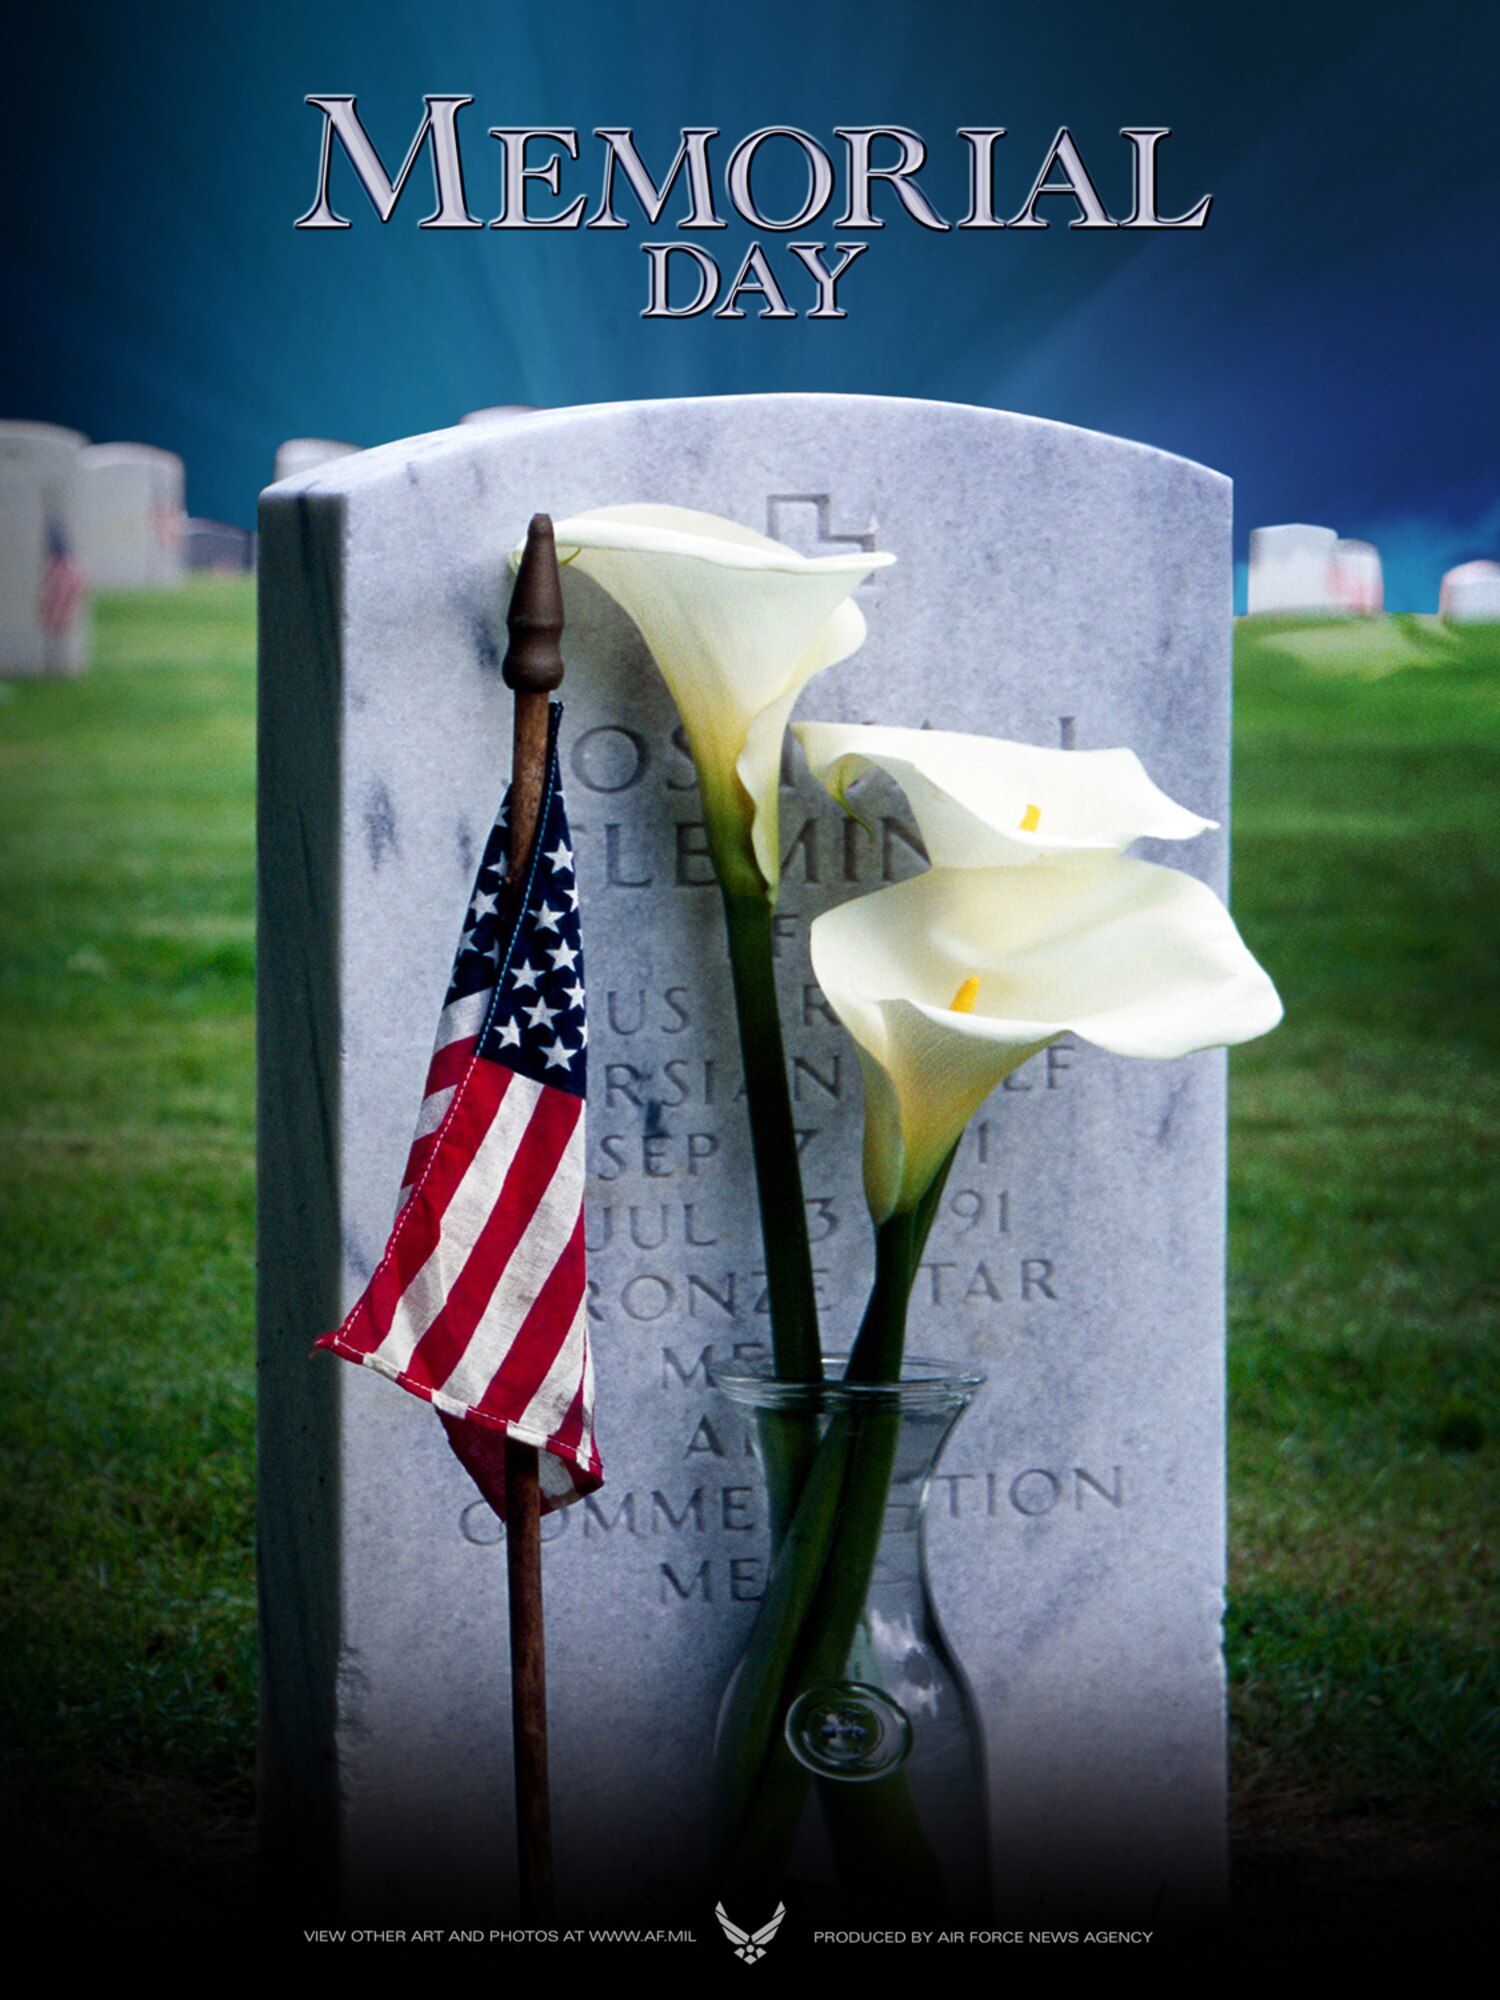 Formerly known as Decoration Day, Memorial Day was first enacted to honor Union and Confederate soldiers following the American Civil War. After World War I, it was extended to honor Americans who have died in all wars. (U.S. Air Force Courtesy Photo)
